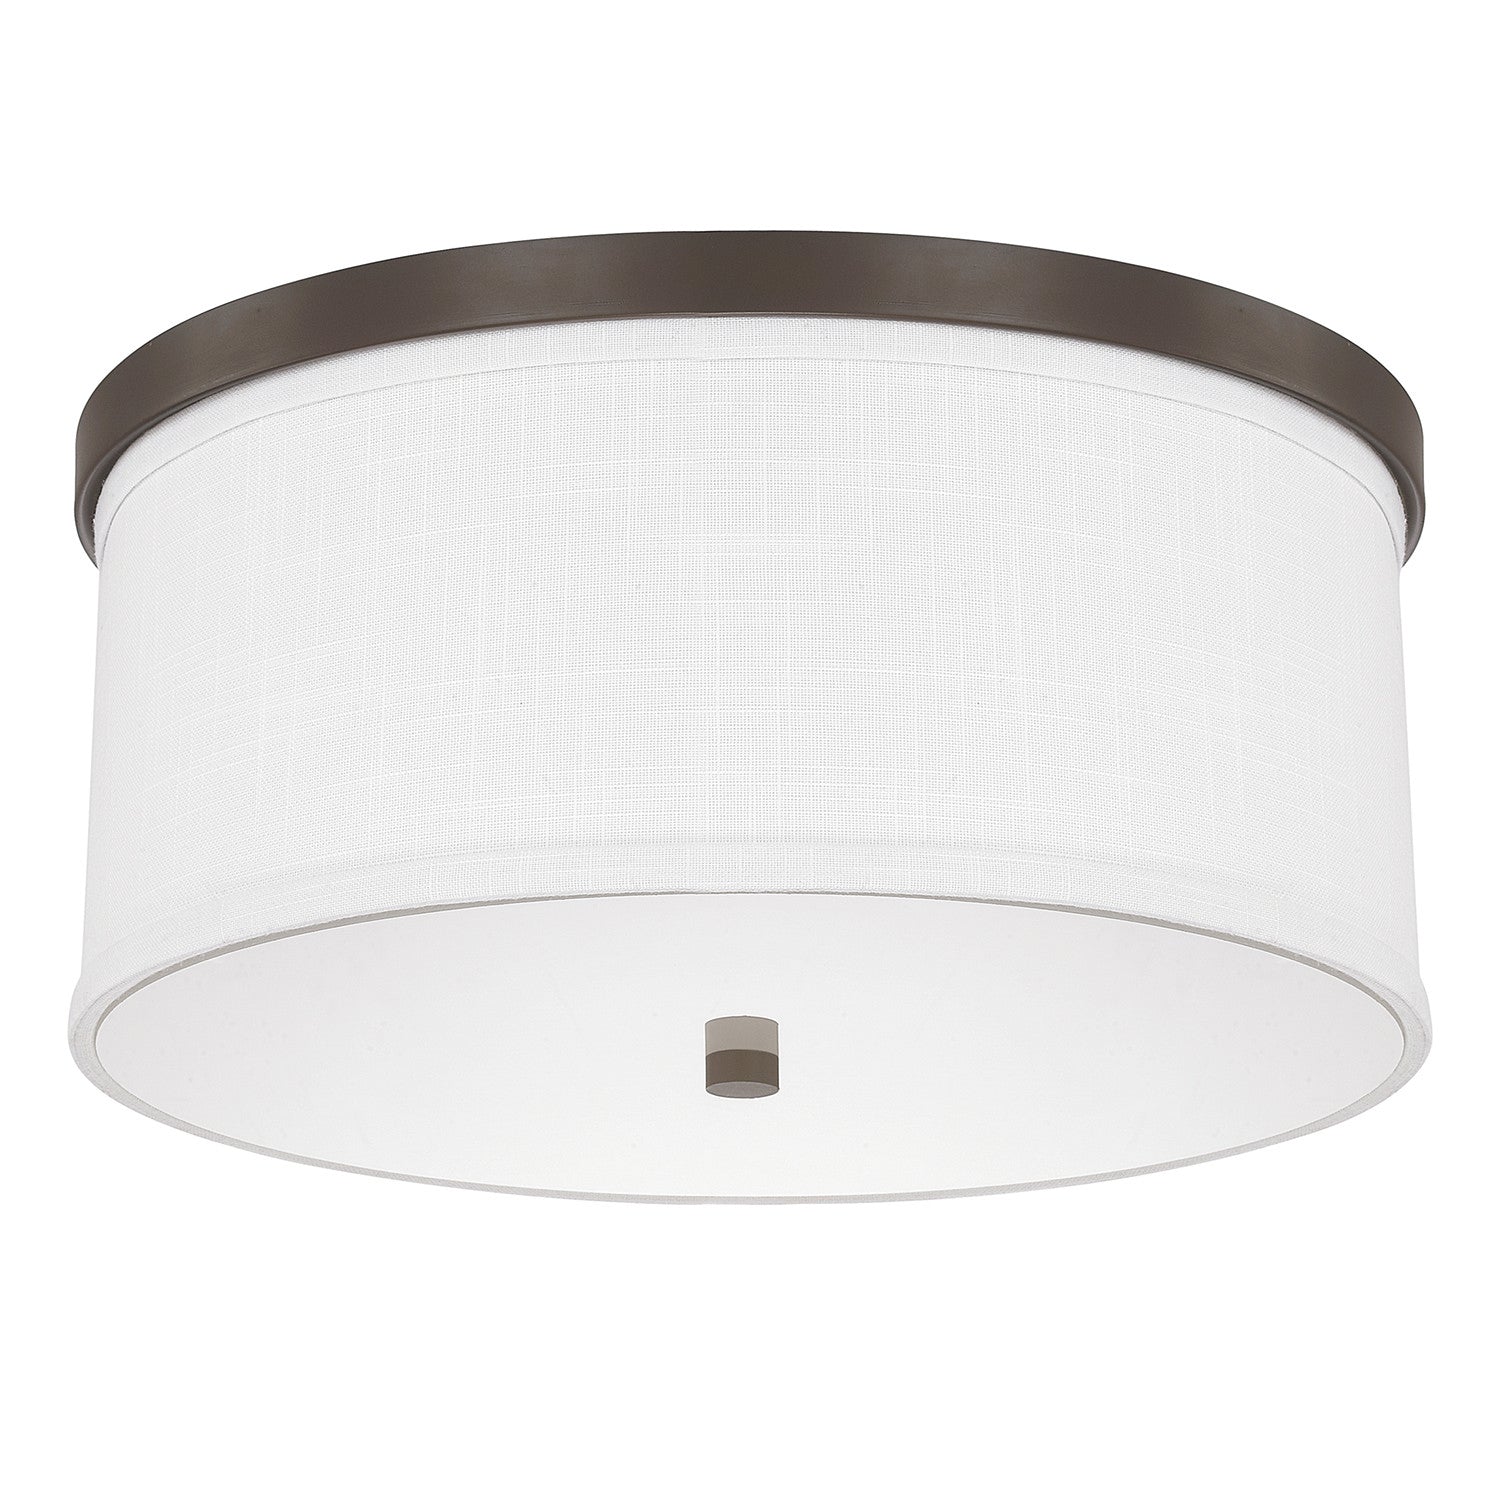 Capital Midtown 2015BB-480 Ceiling Light - Burnished Bronze